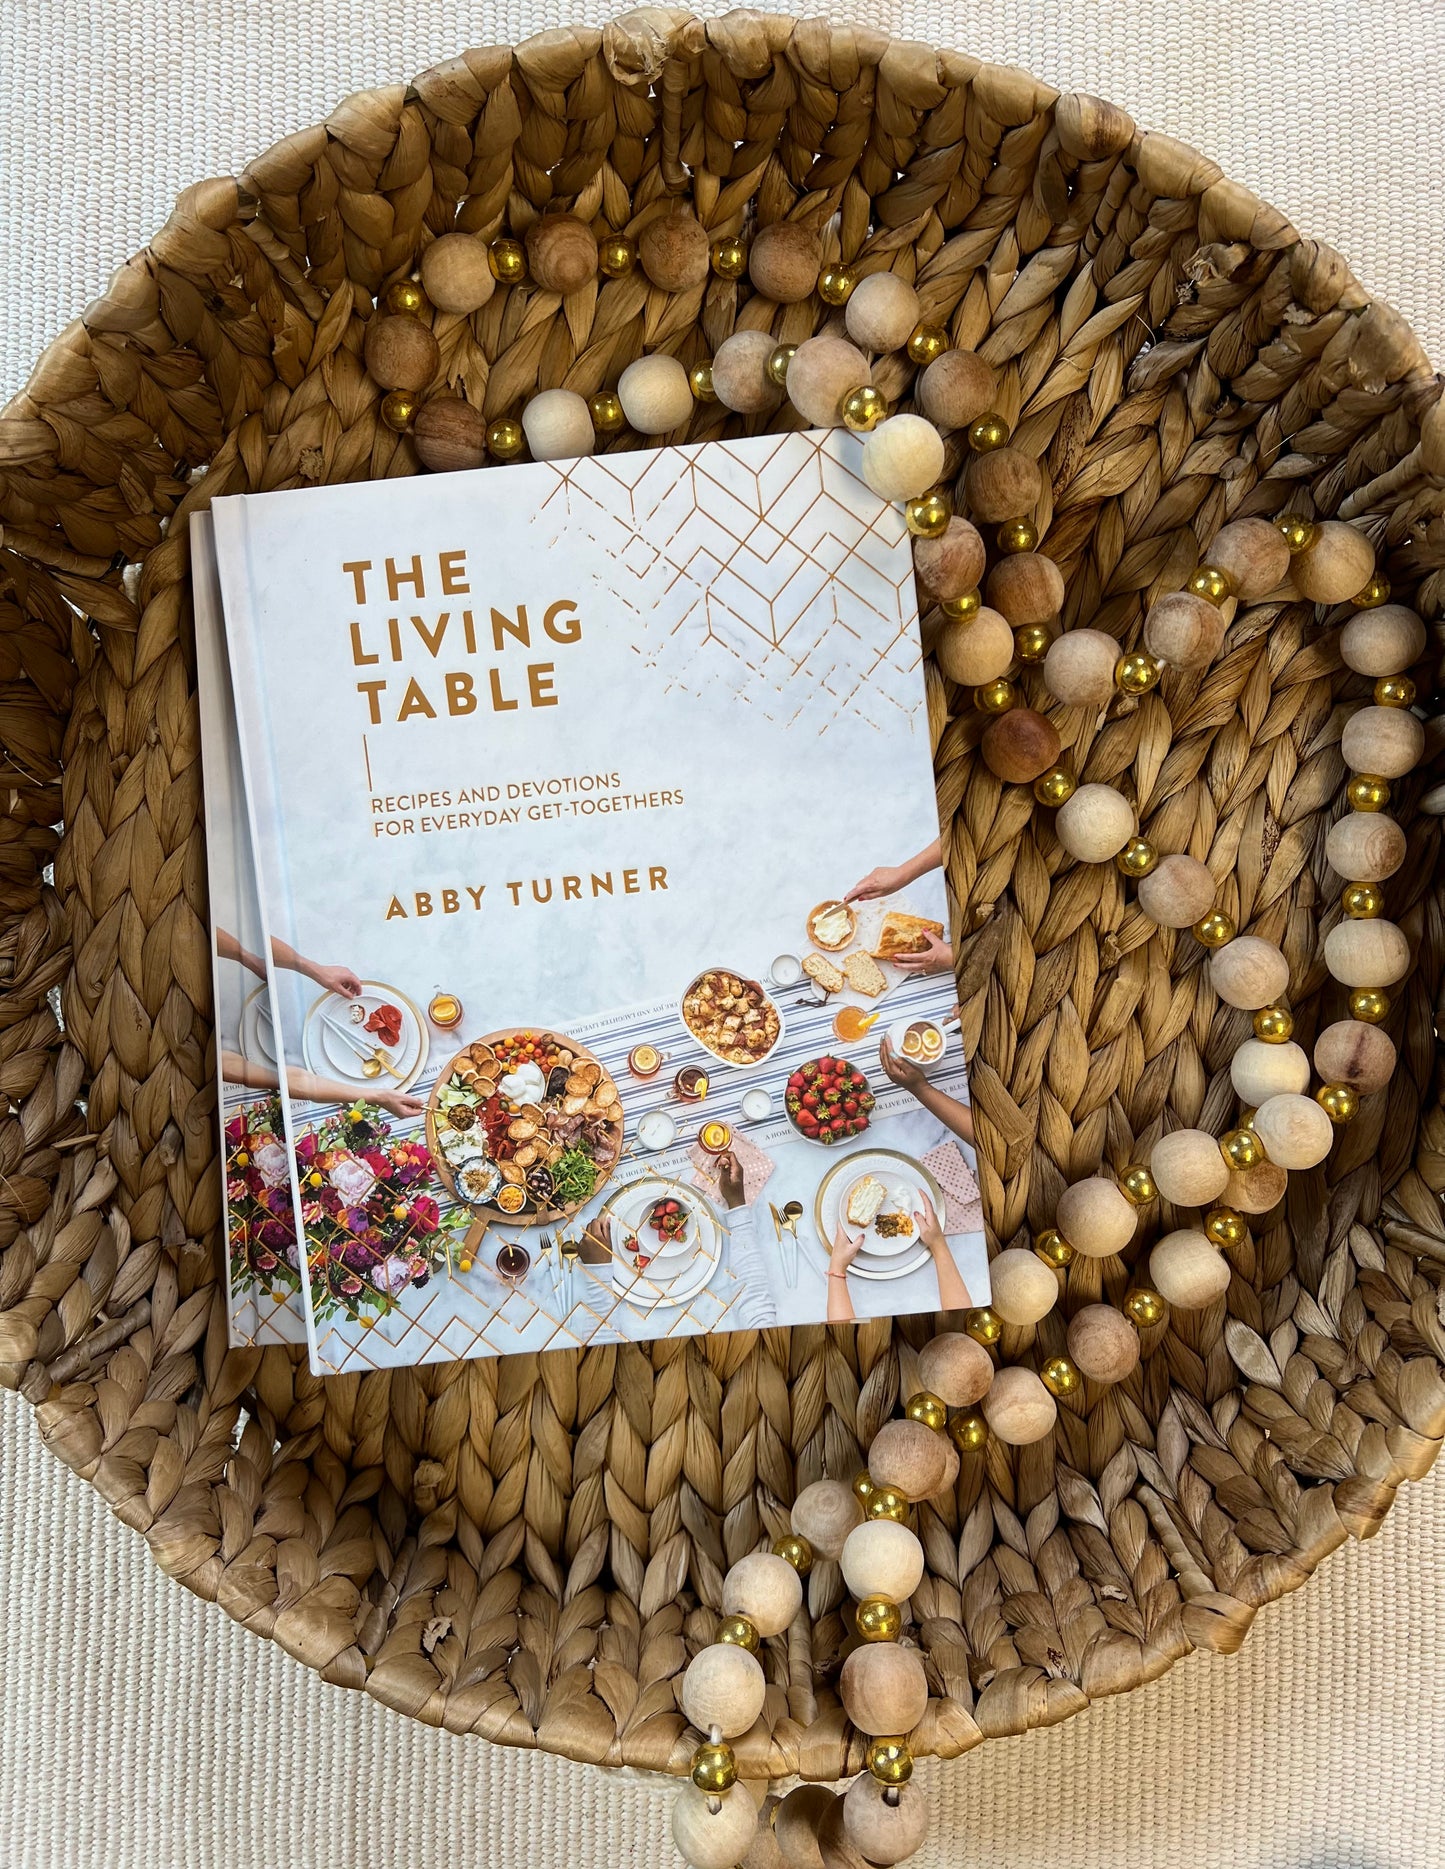 “The Living Table” Cookbook